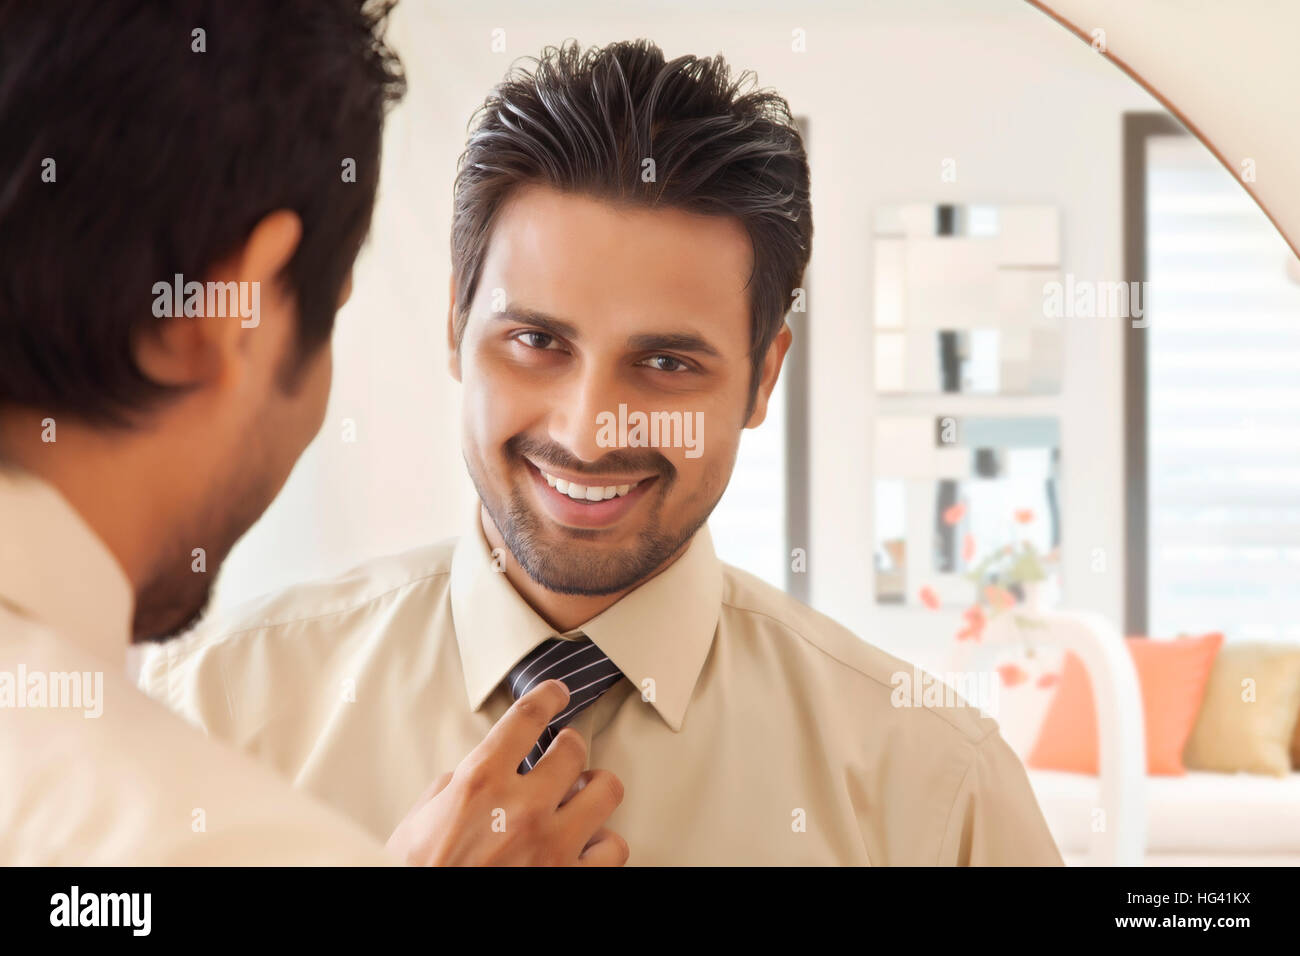 Businessman looking at self in mirror Stock Photo